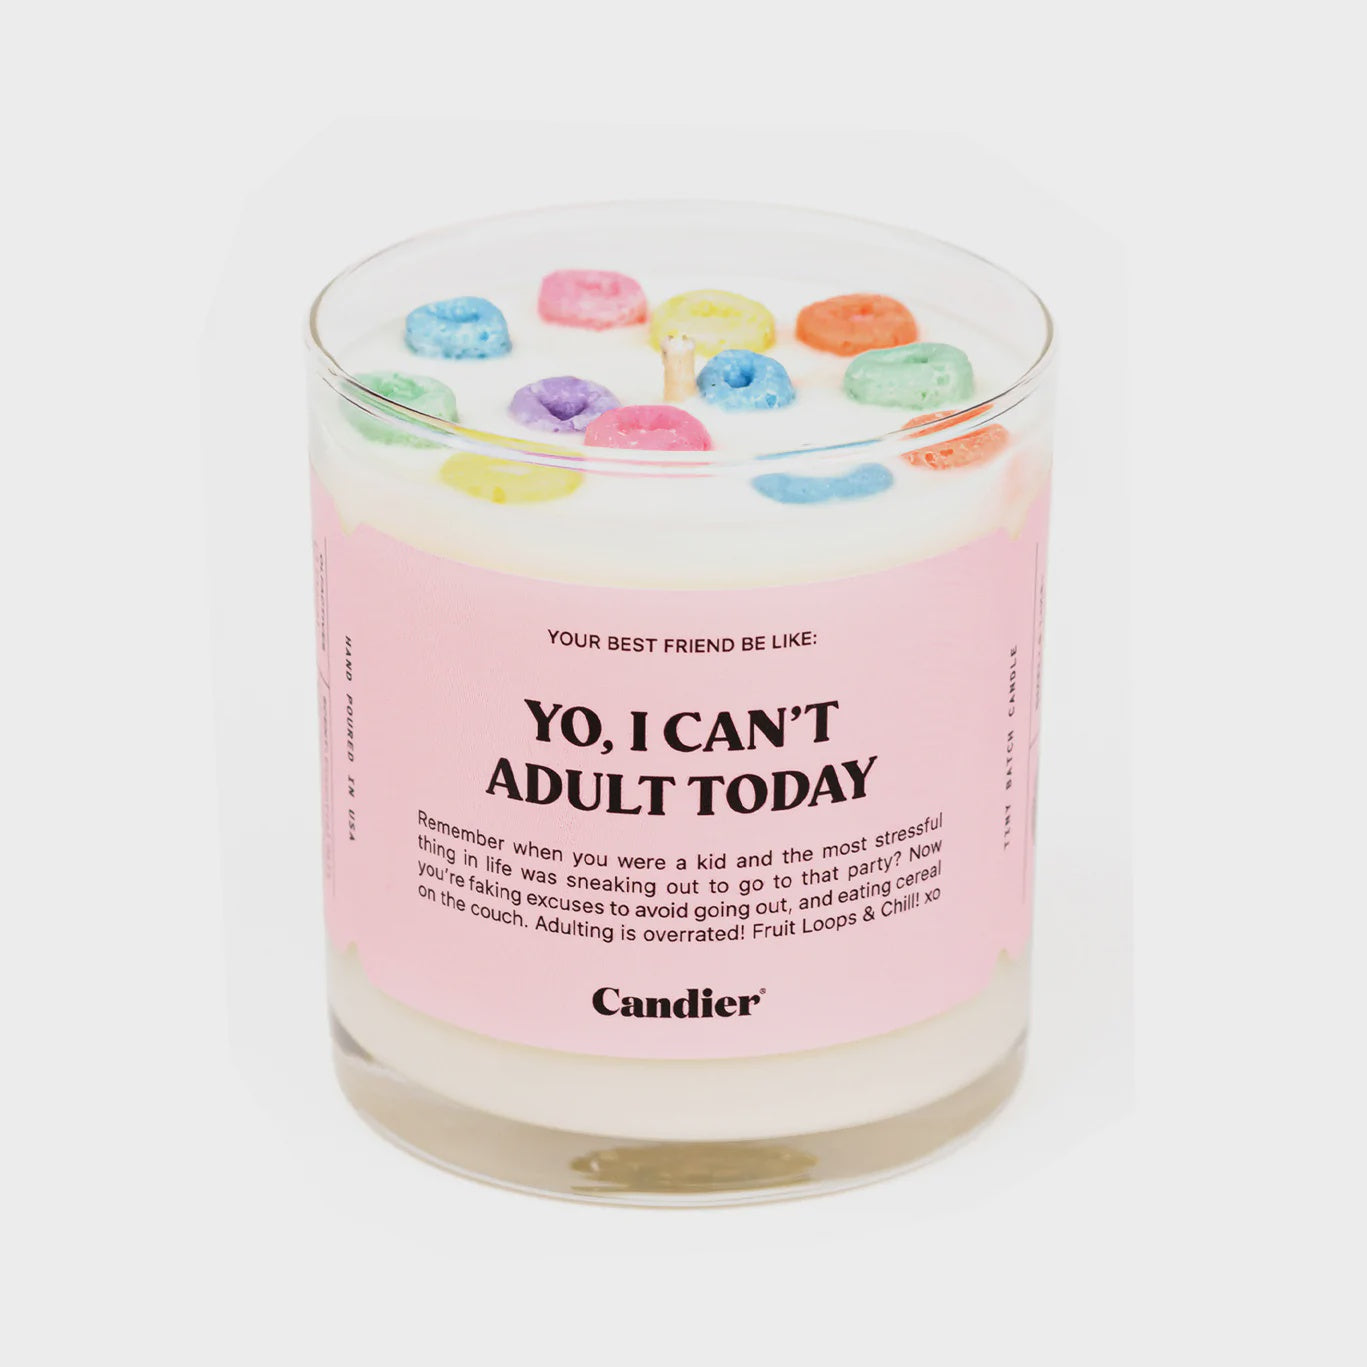 Can't Adult Today Cereal Candle